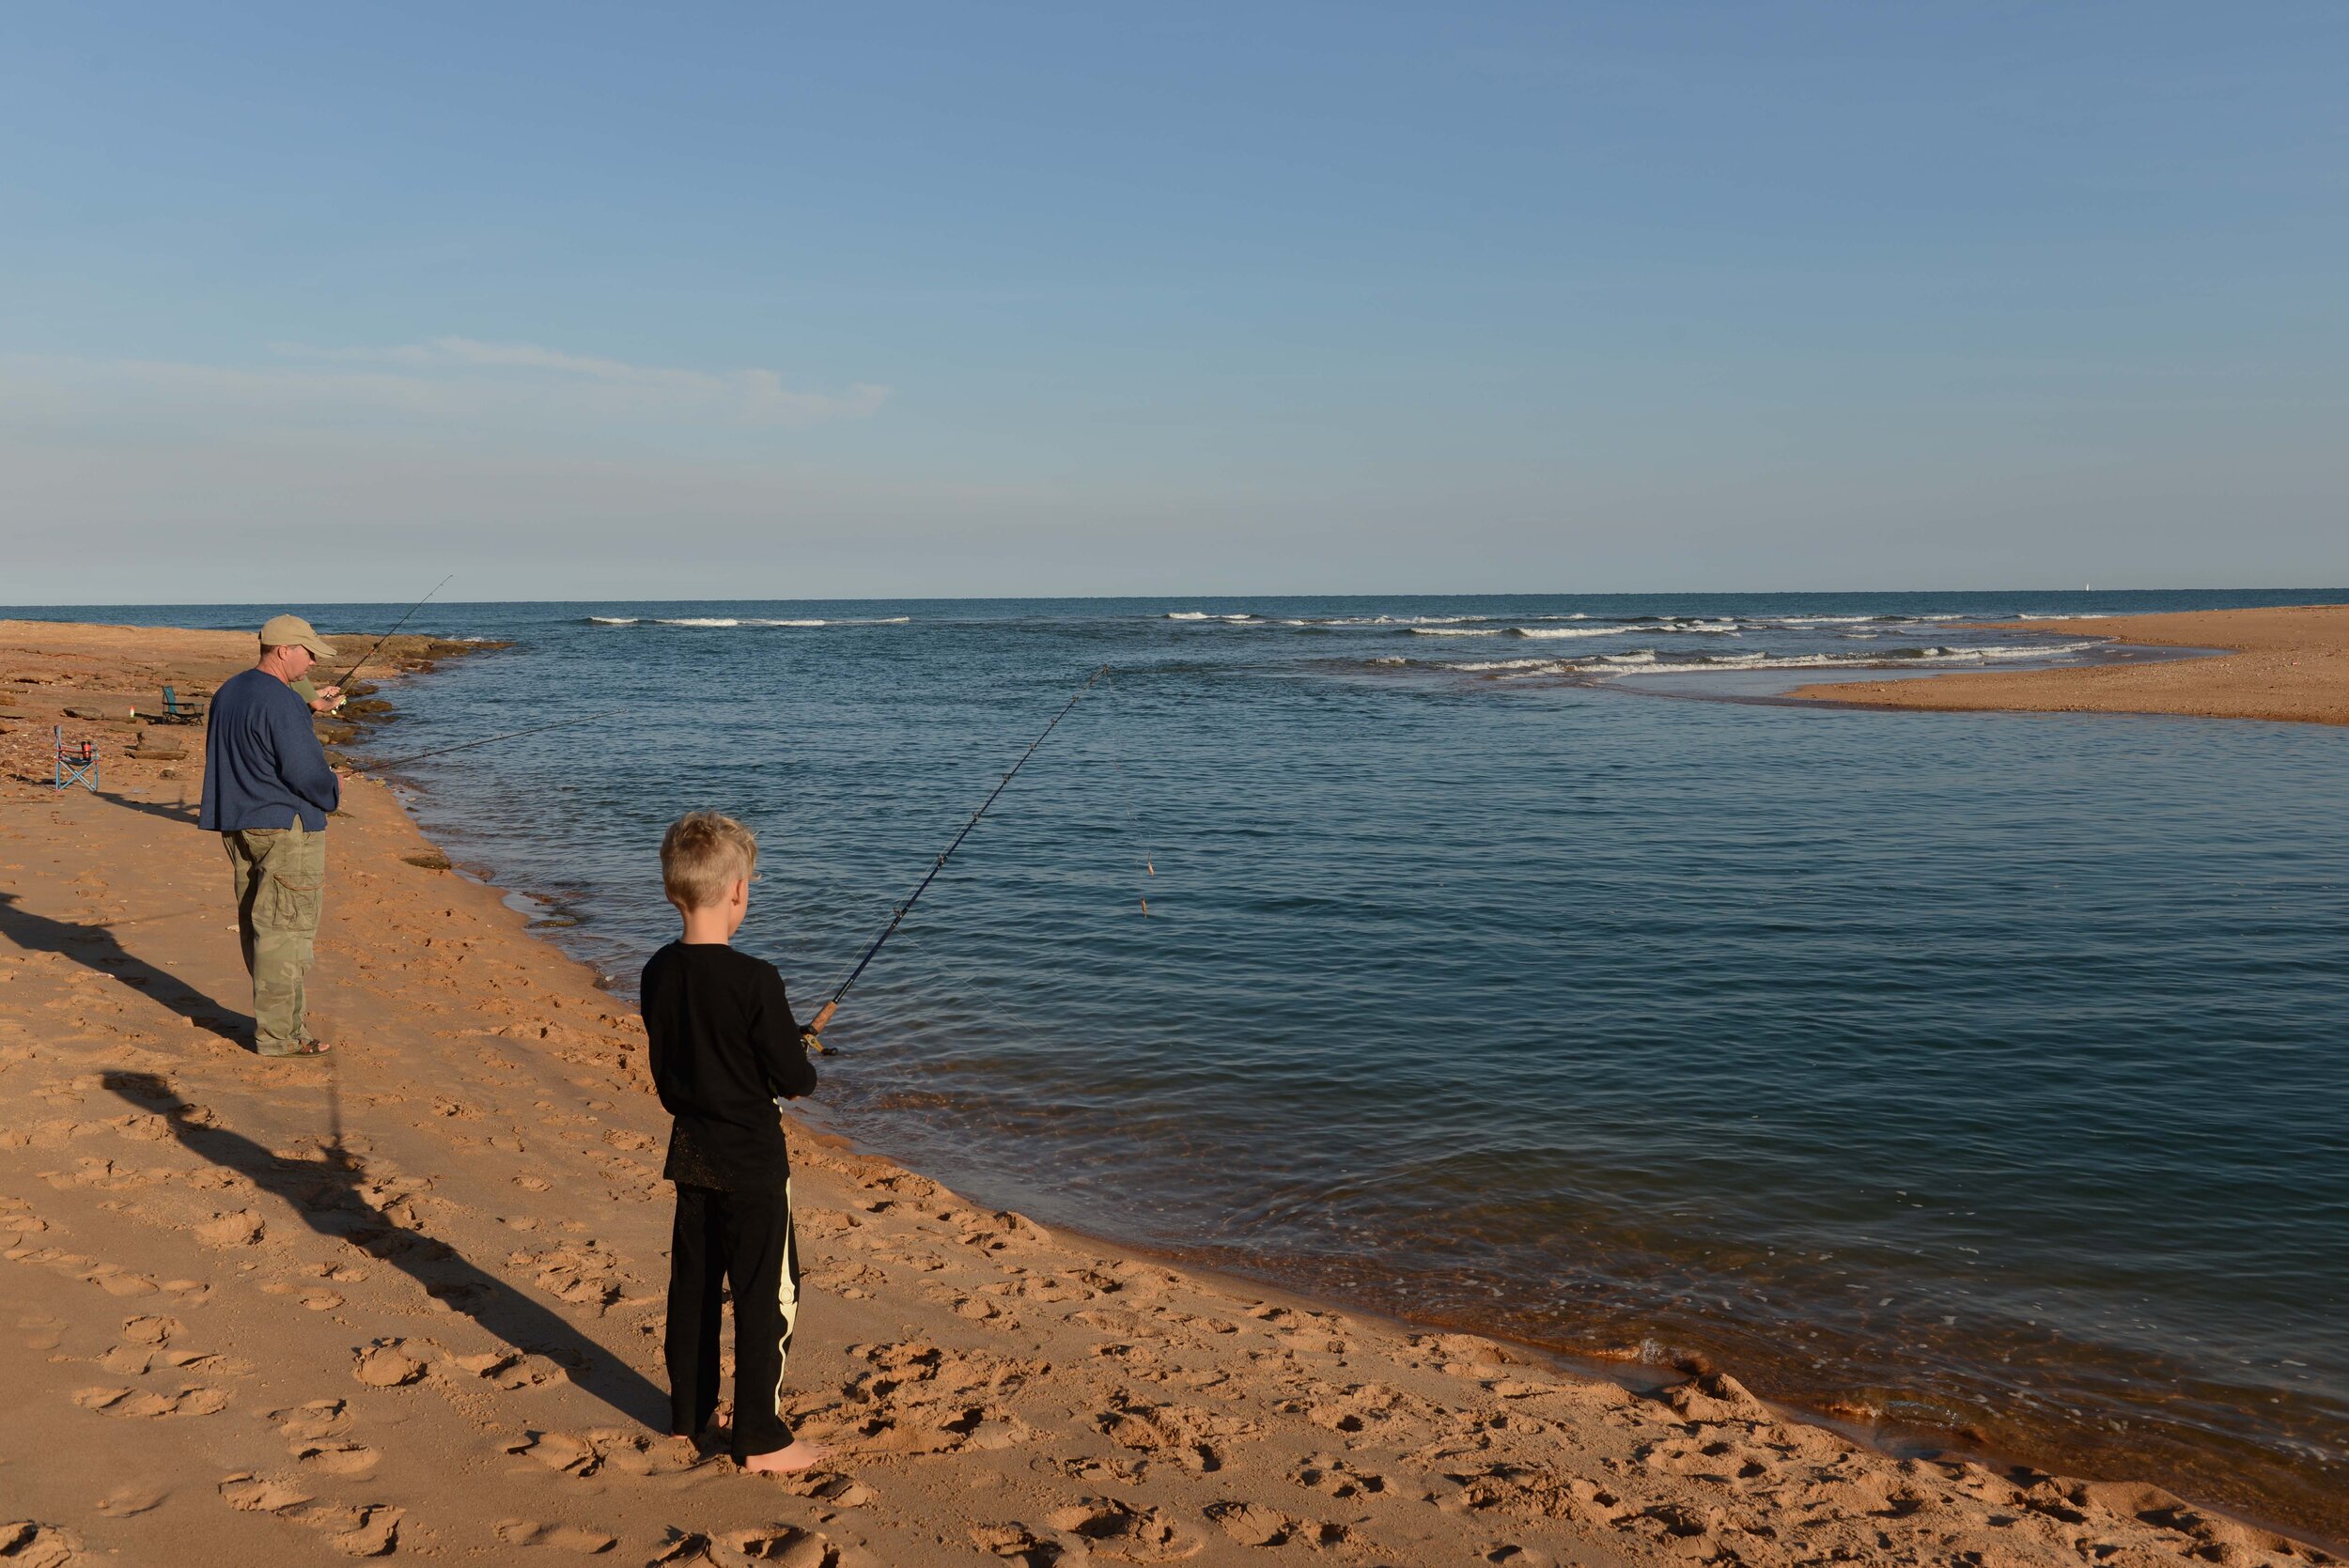 Tidal river at high tide is a great spot to try your luck at fishing